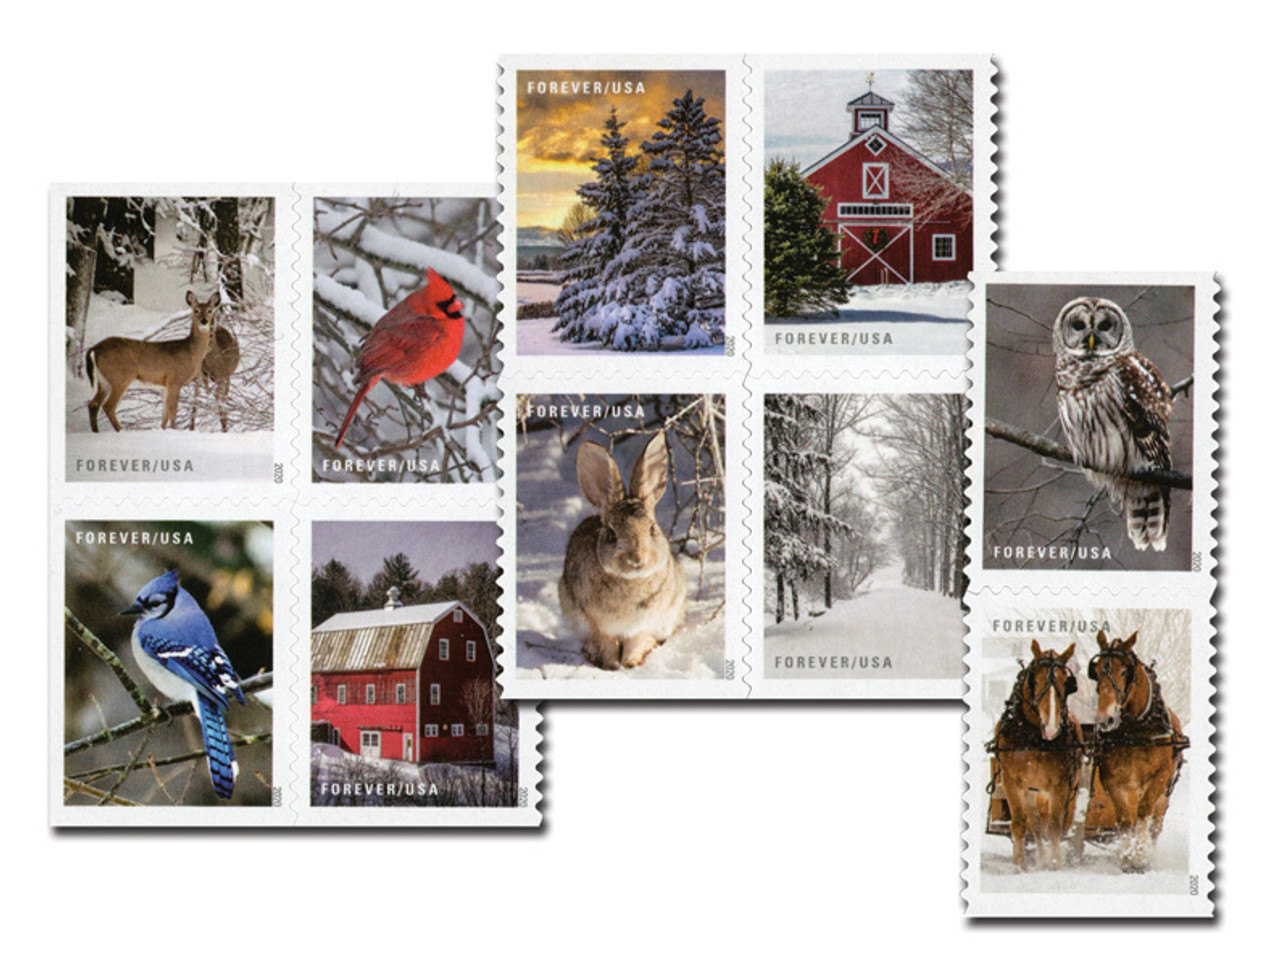 5532-41 - 2020 First-Class Forever Stamps - Winter Scenes - Mystic Stamp  Company